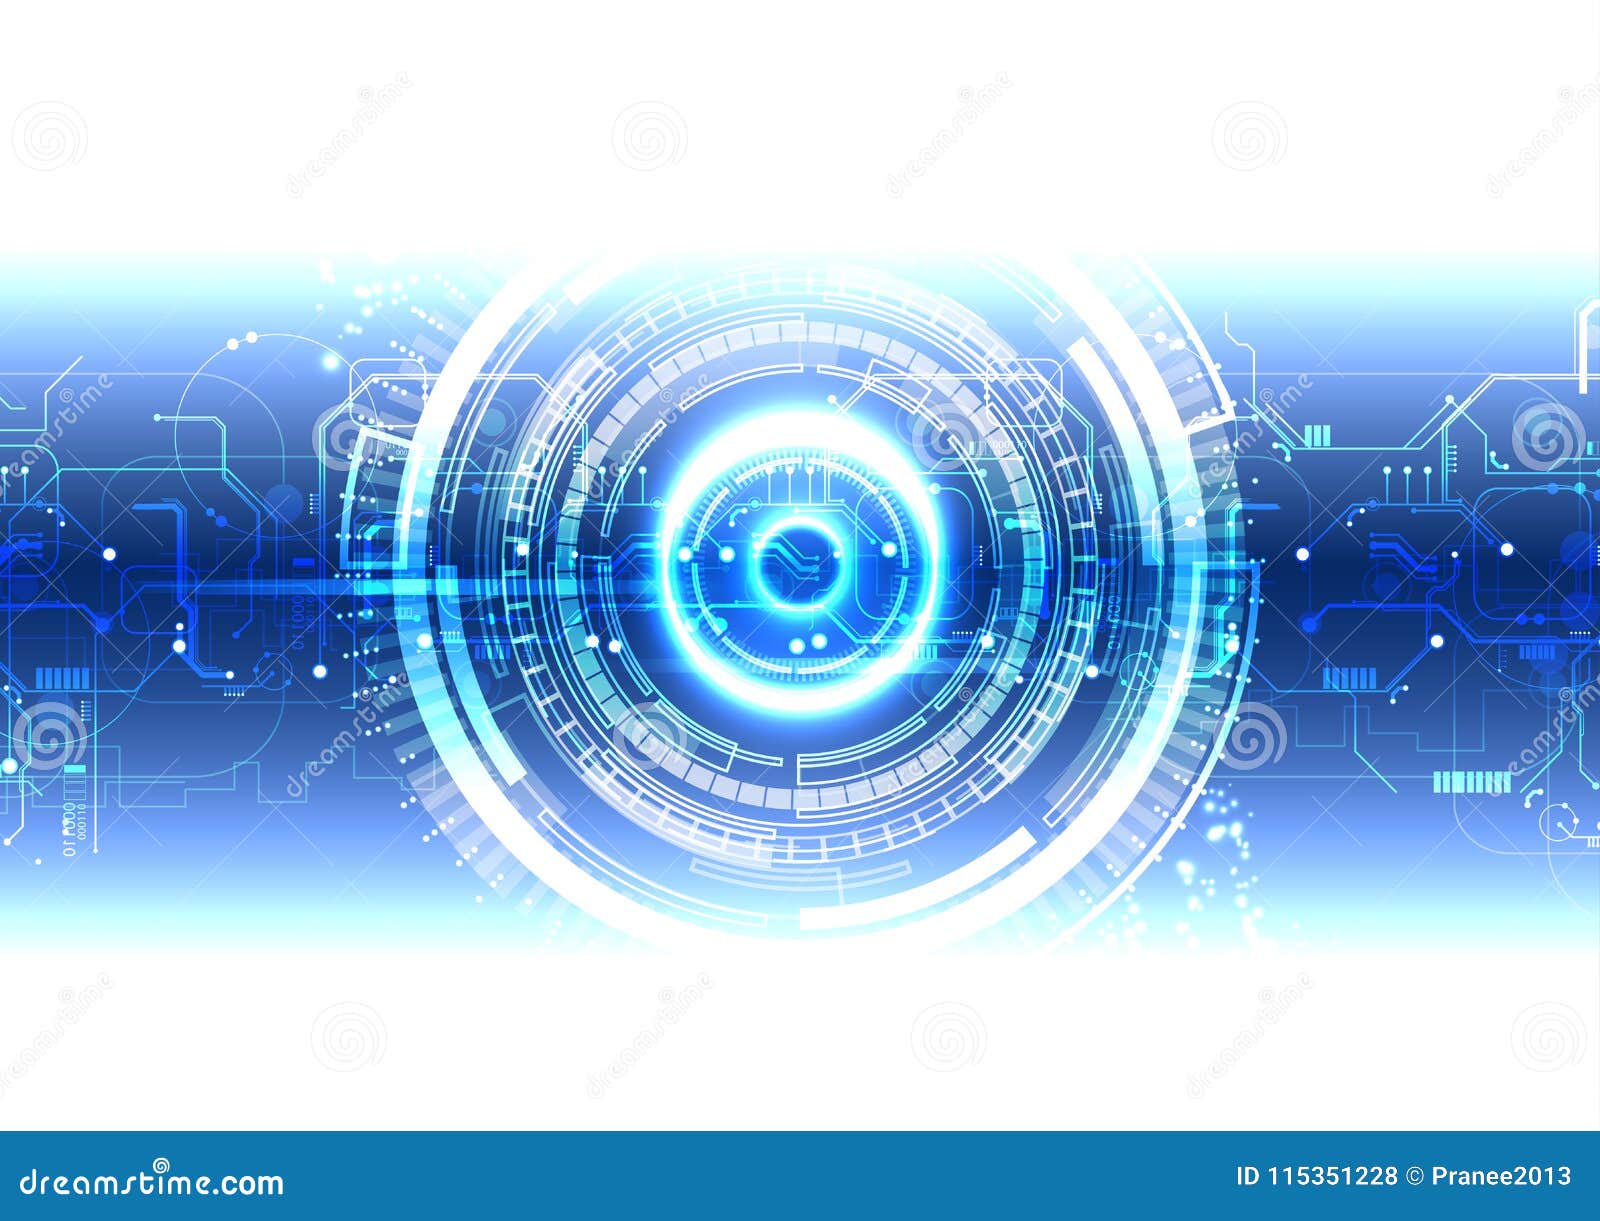 White Blue Technology Background Stock Vector - Illustration of connection,  motherboard: 115351228